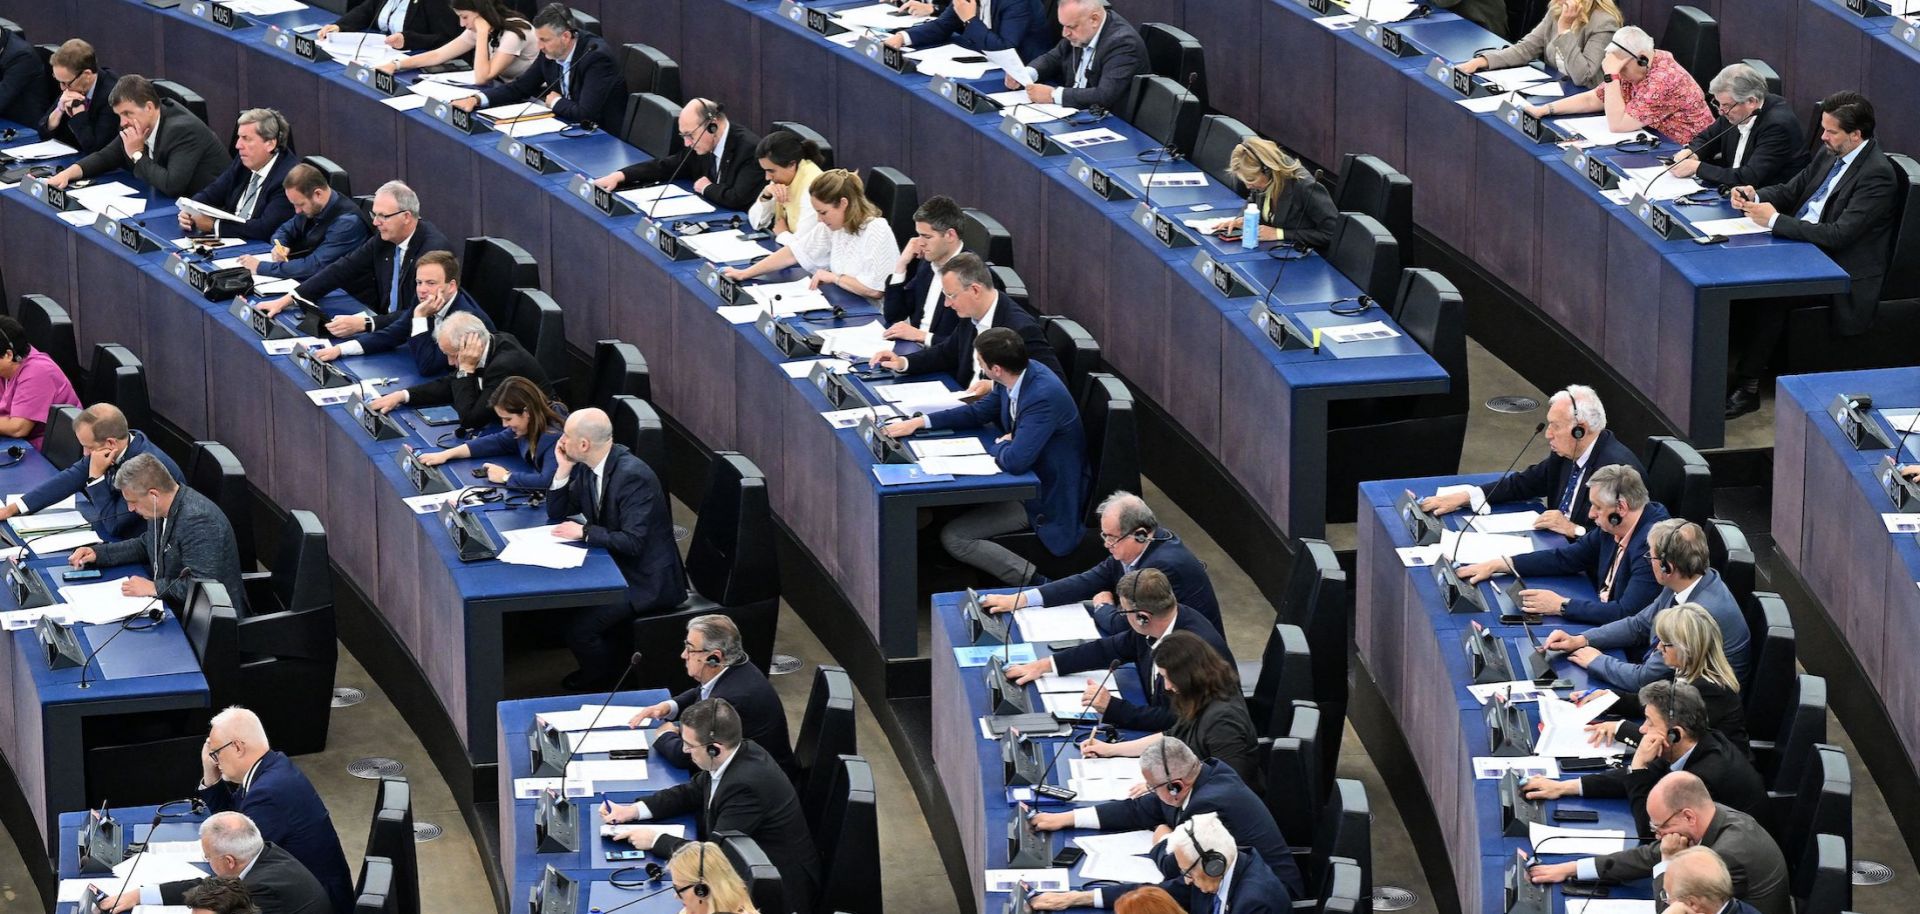 Members of the European Parliament take part in voting on the Artificial Intelligence Act during a plenary session at the European Parliament.